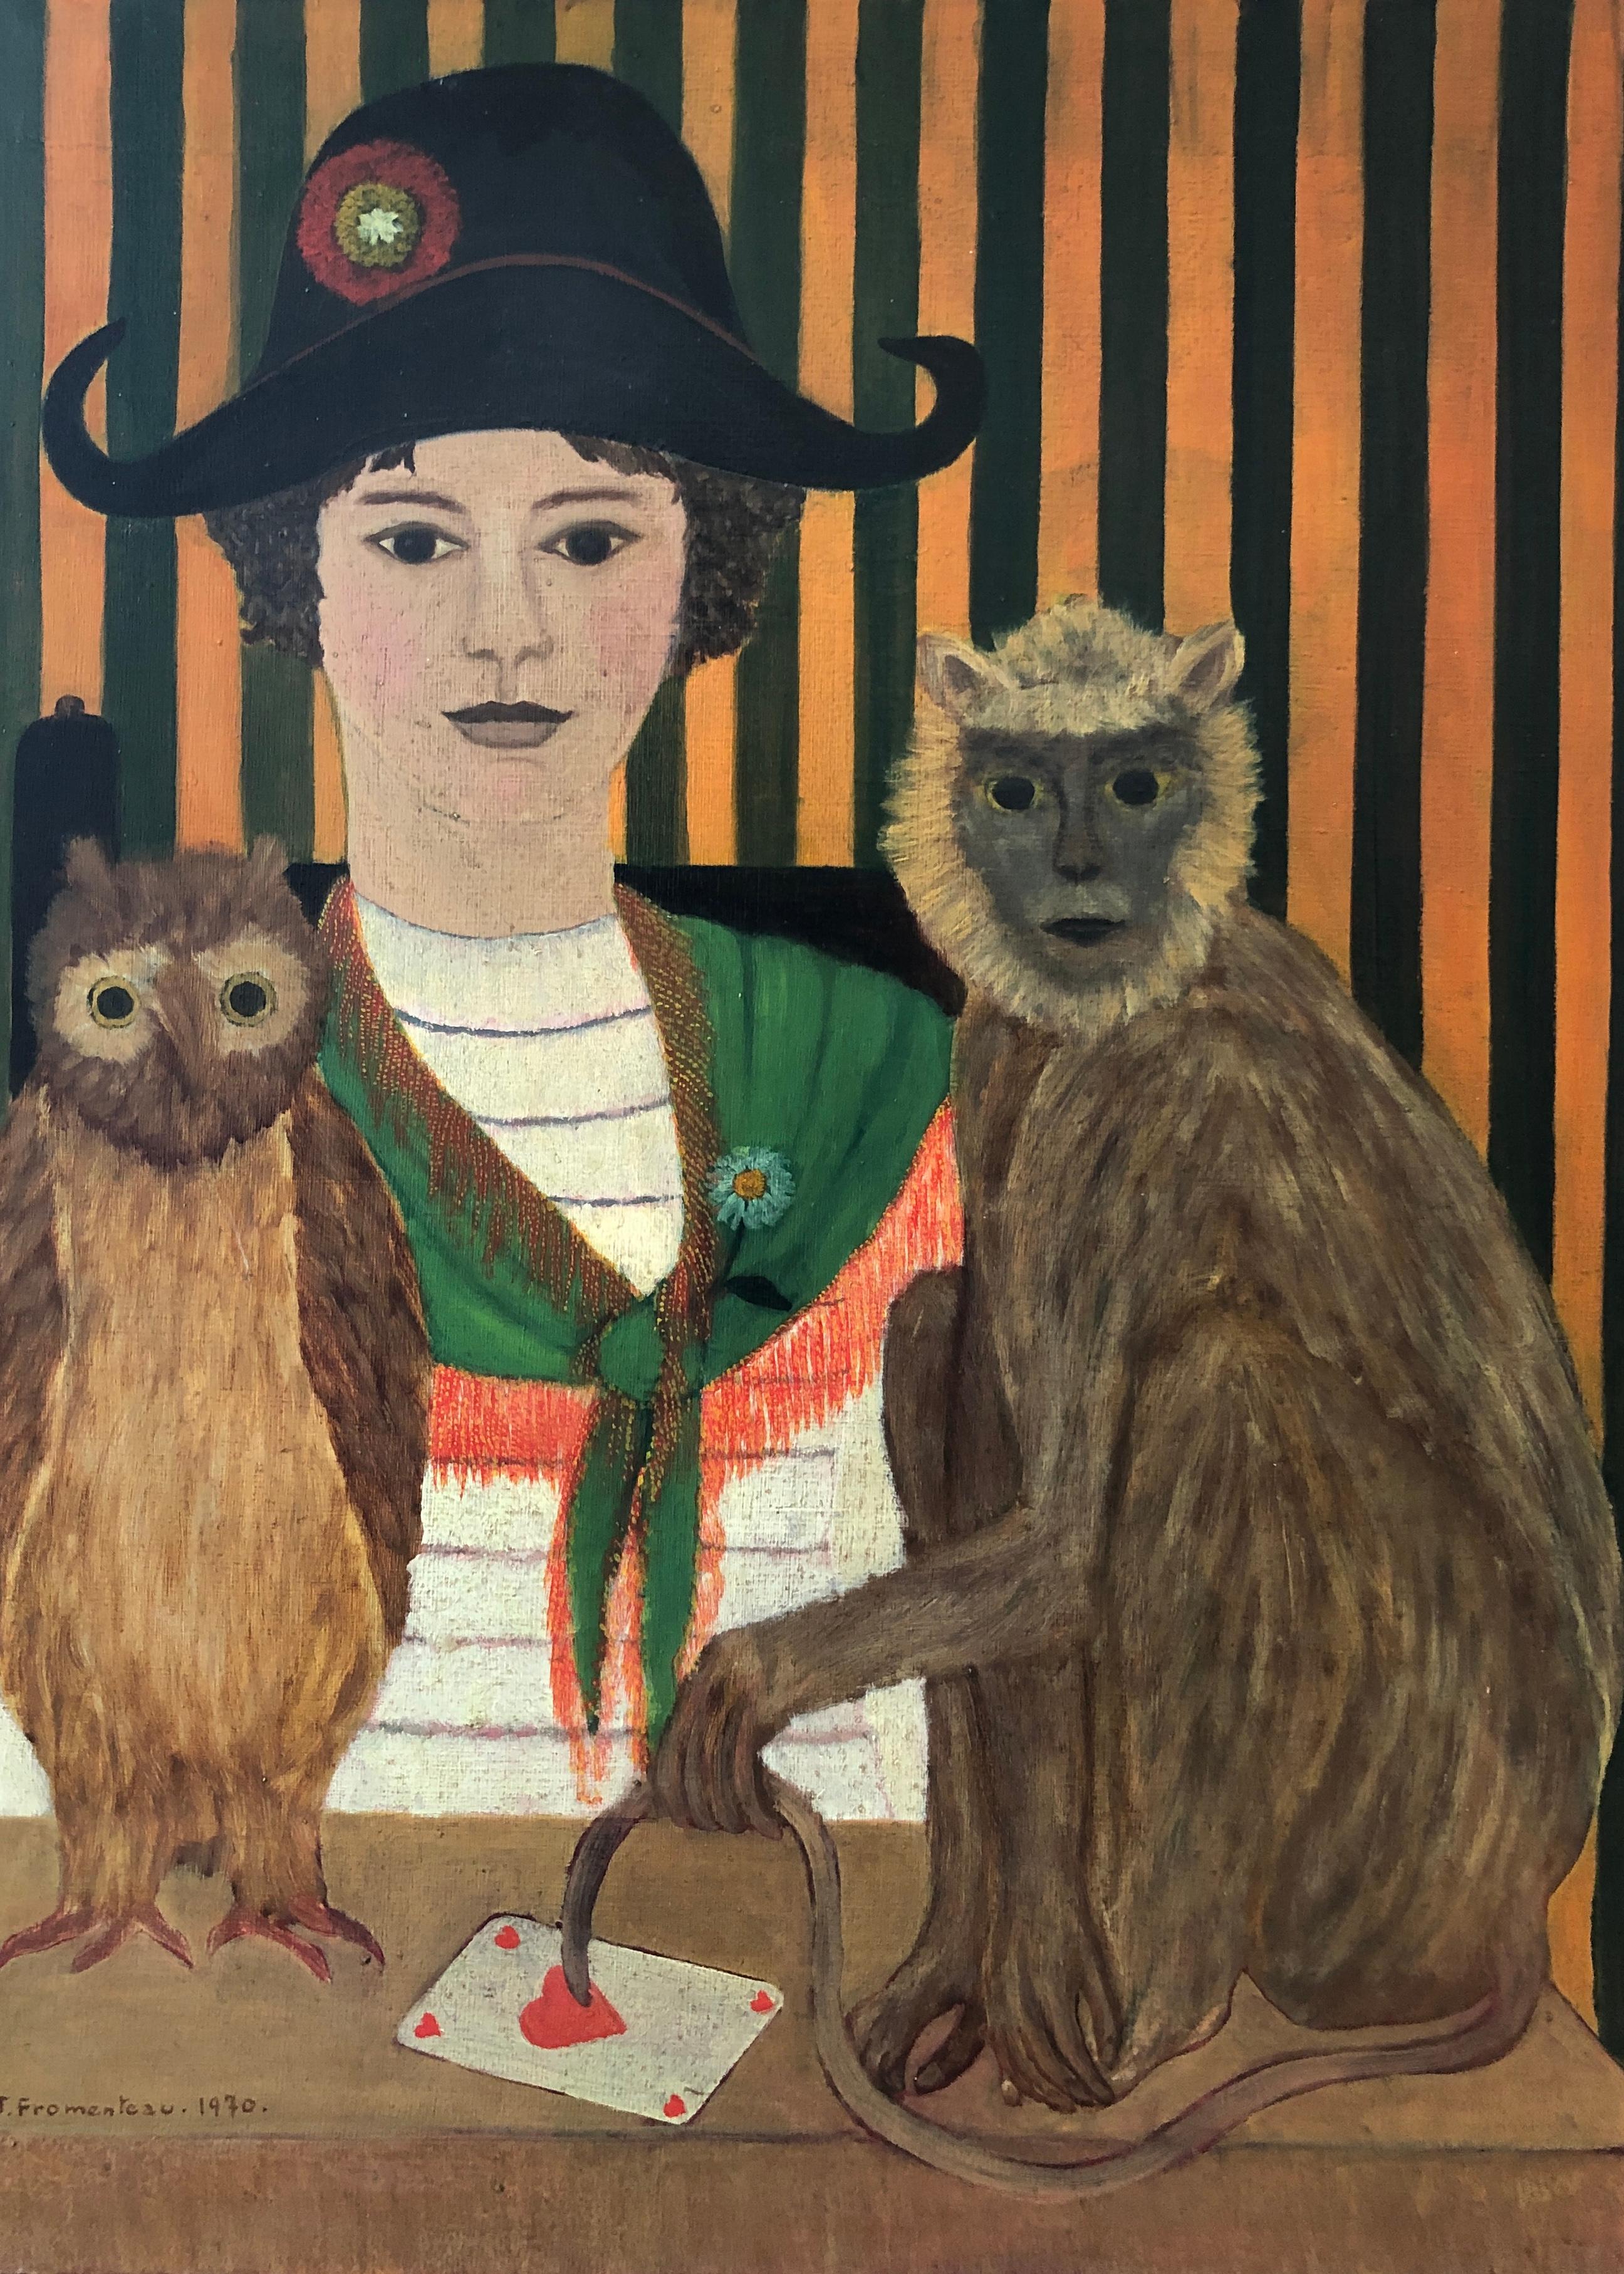 Jacqueline Fromenteau Figurative Painting - Young girl with cocked hat, monkey, owl, and queen of hearts